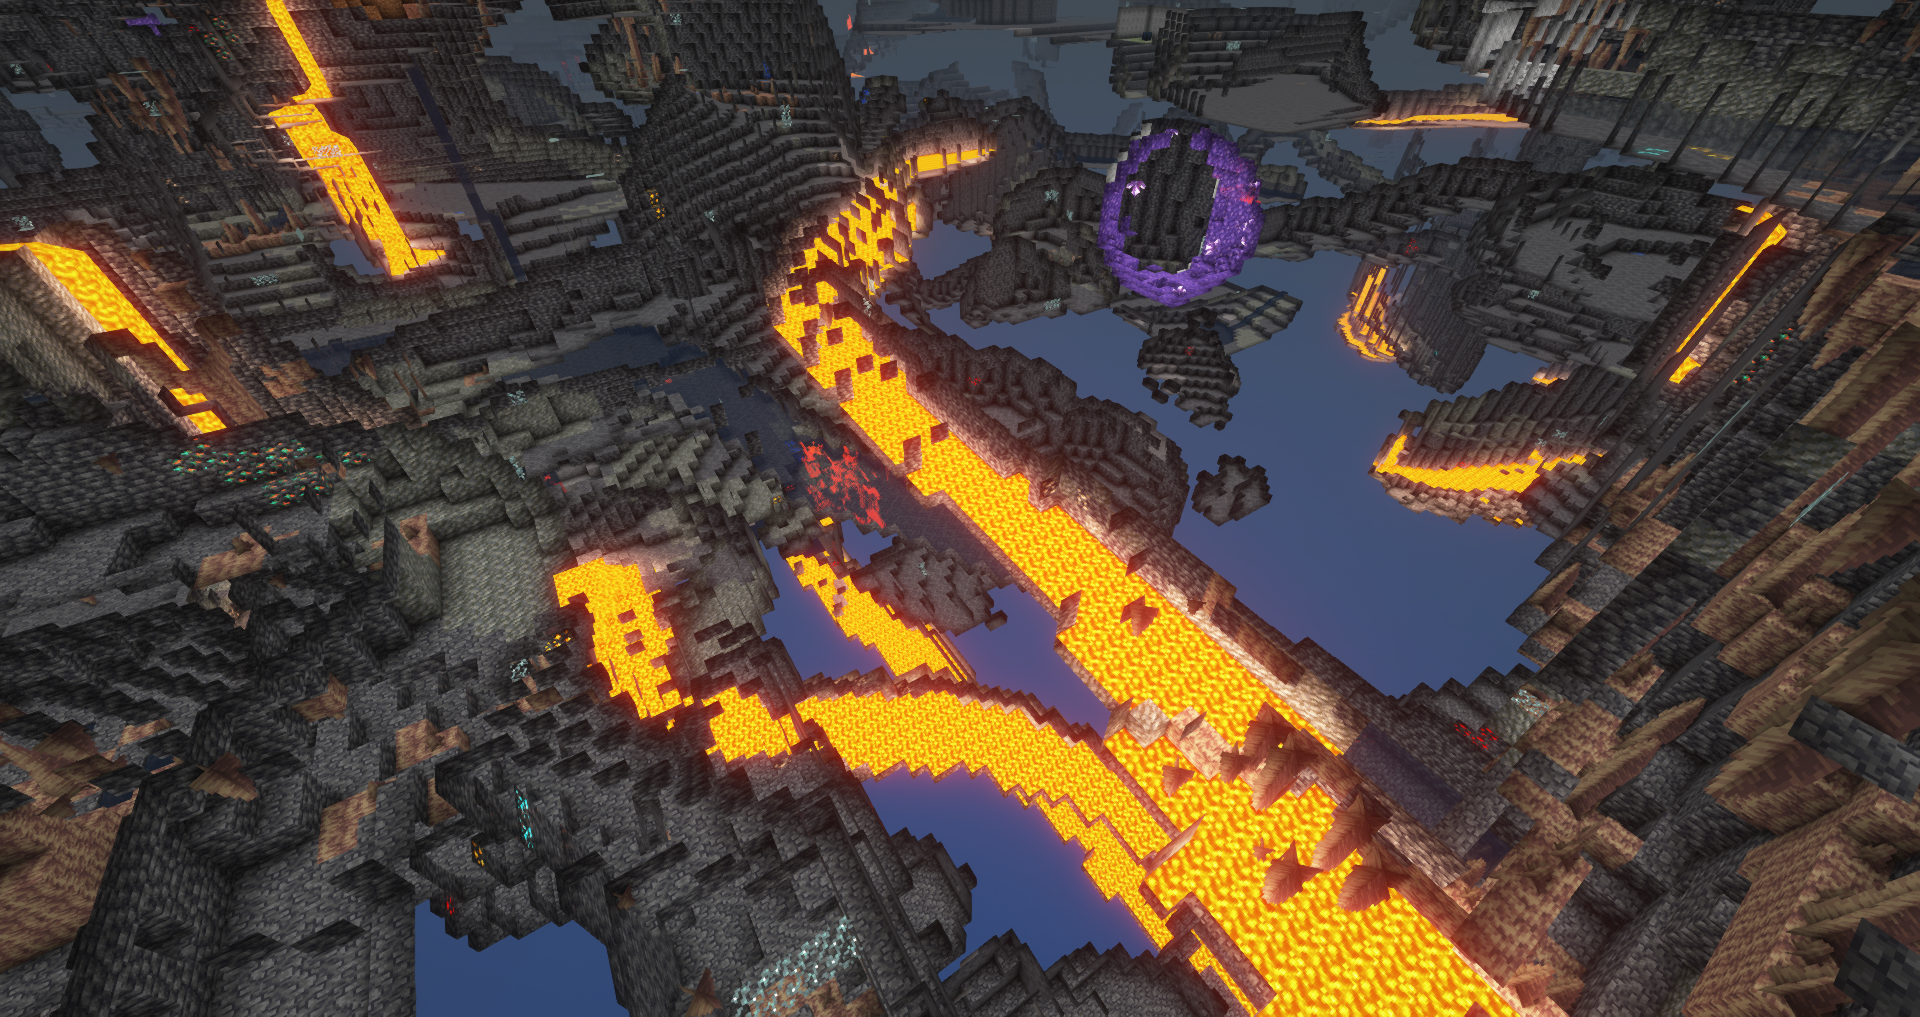 You can see a variety of terrain in this screenshot, including the type of variety the new noise caves can generate + lava rivers. Note that rivers are meant to be long and sometimes difficult to explore.